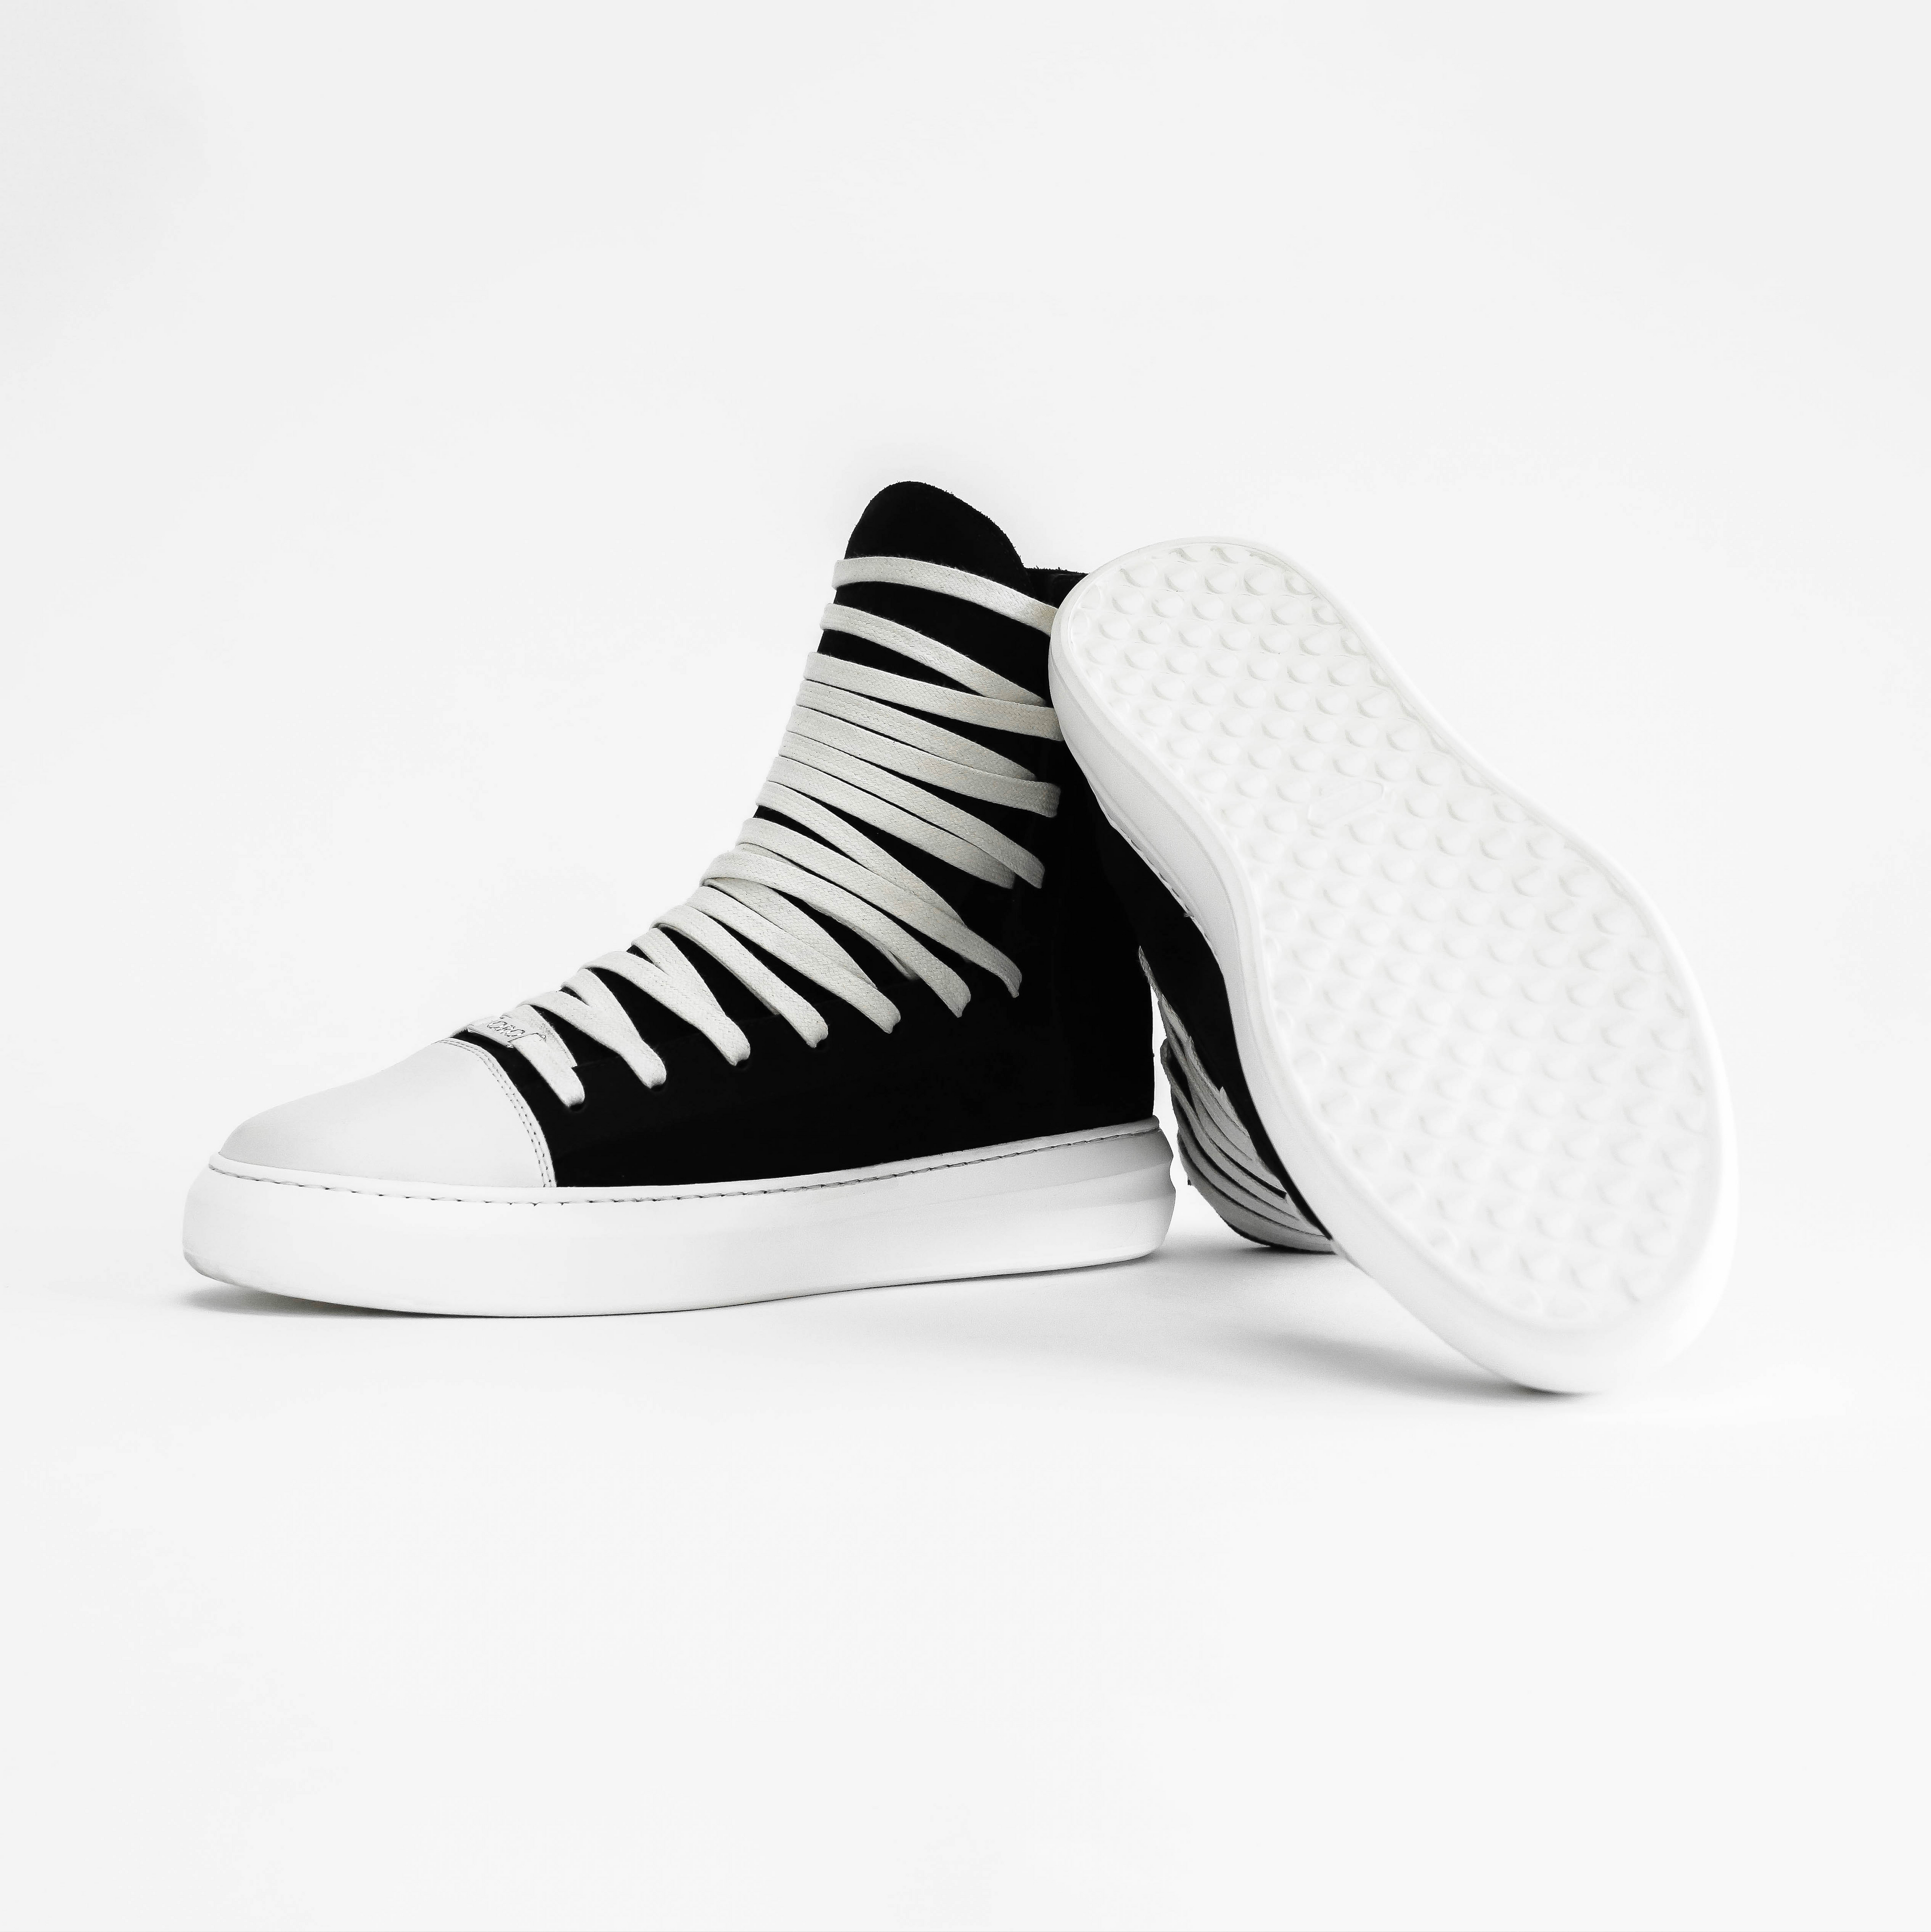 THE VALENCIA SNEAKERS